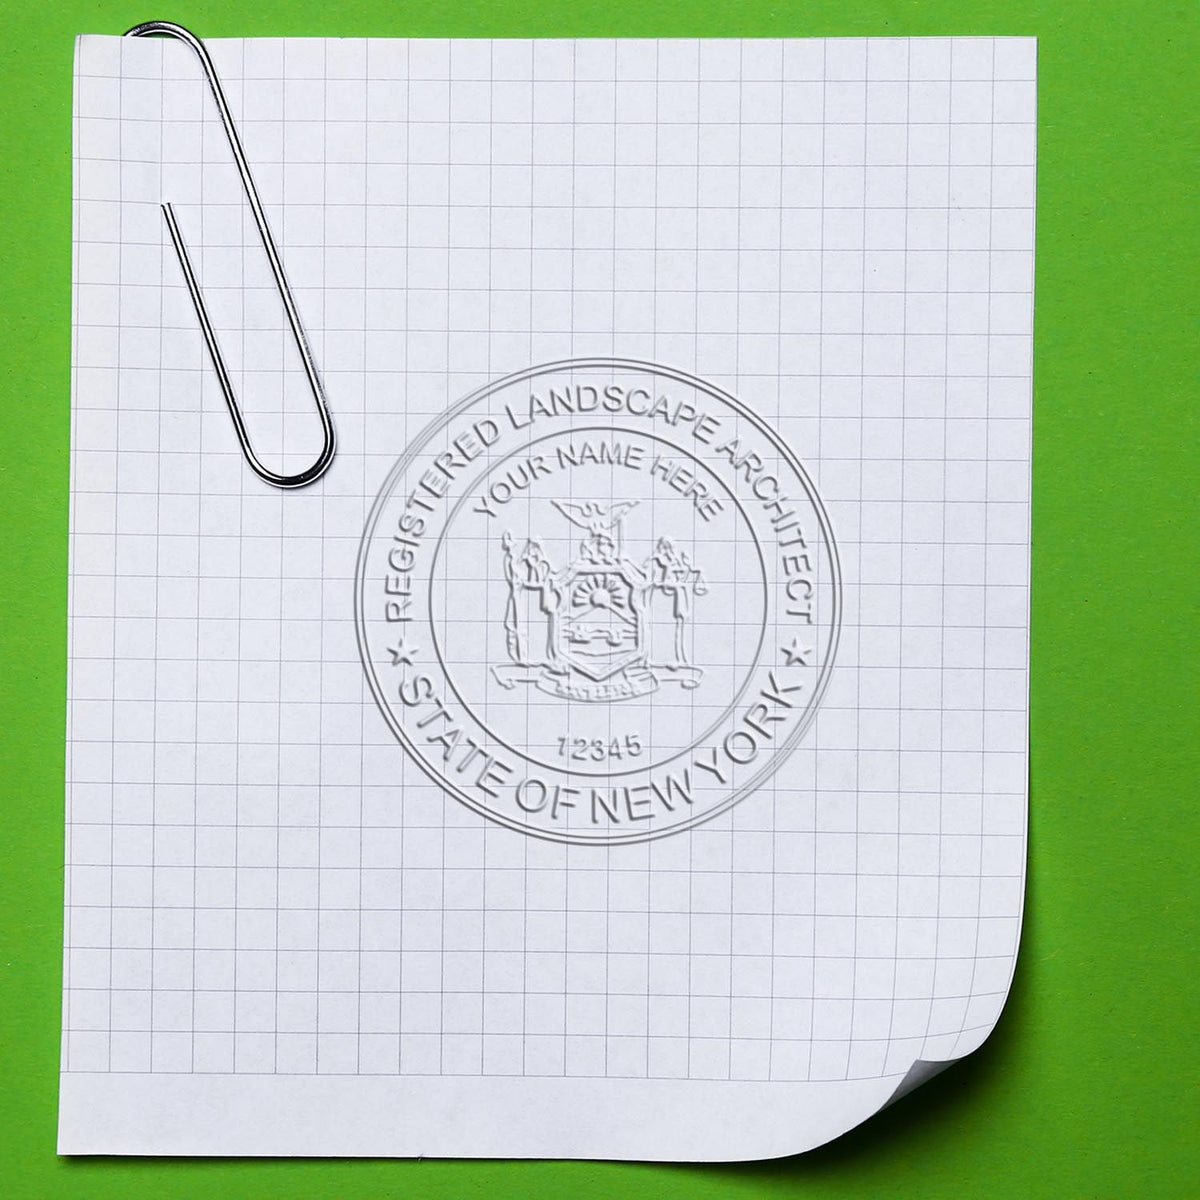 An in use photo of the Gift New York Landscape Architect Seal showing a sample imprint on a cardstock